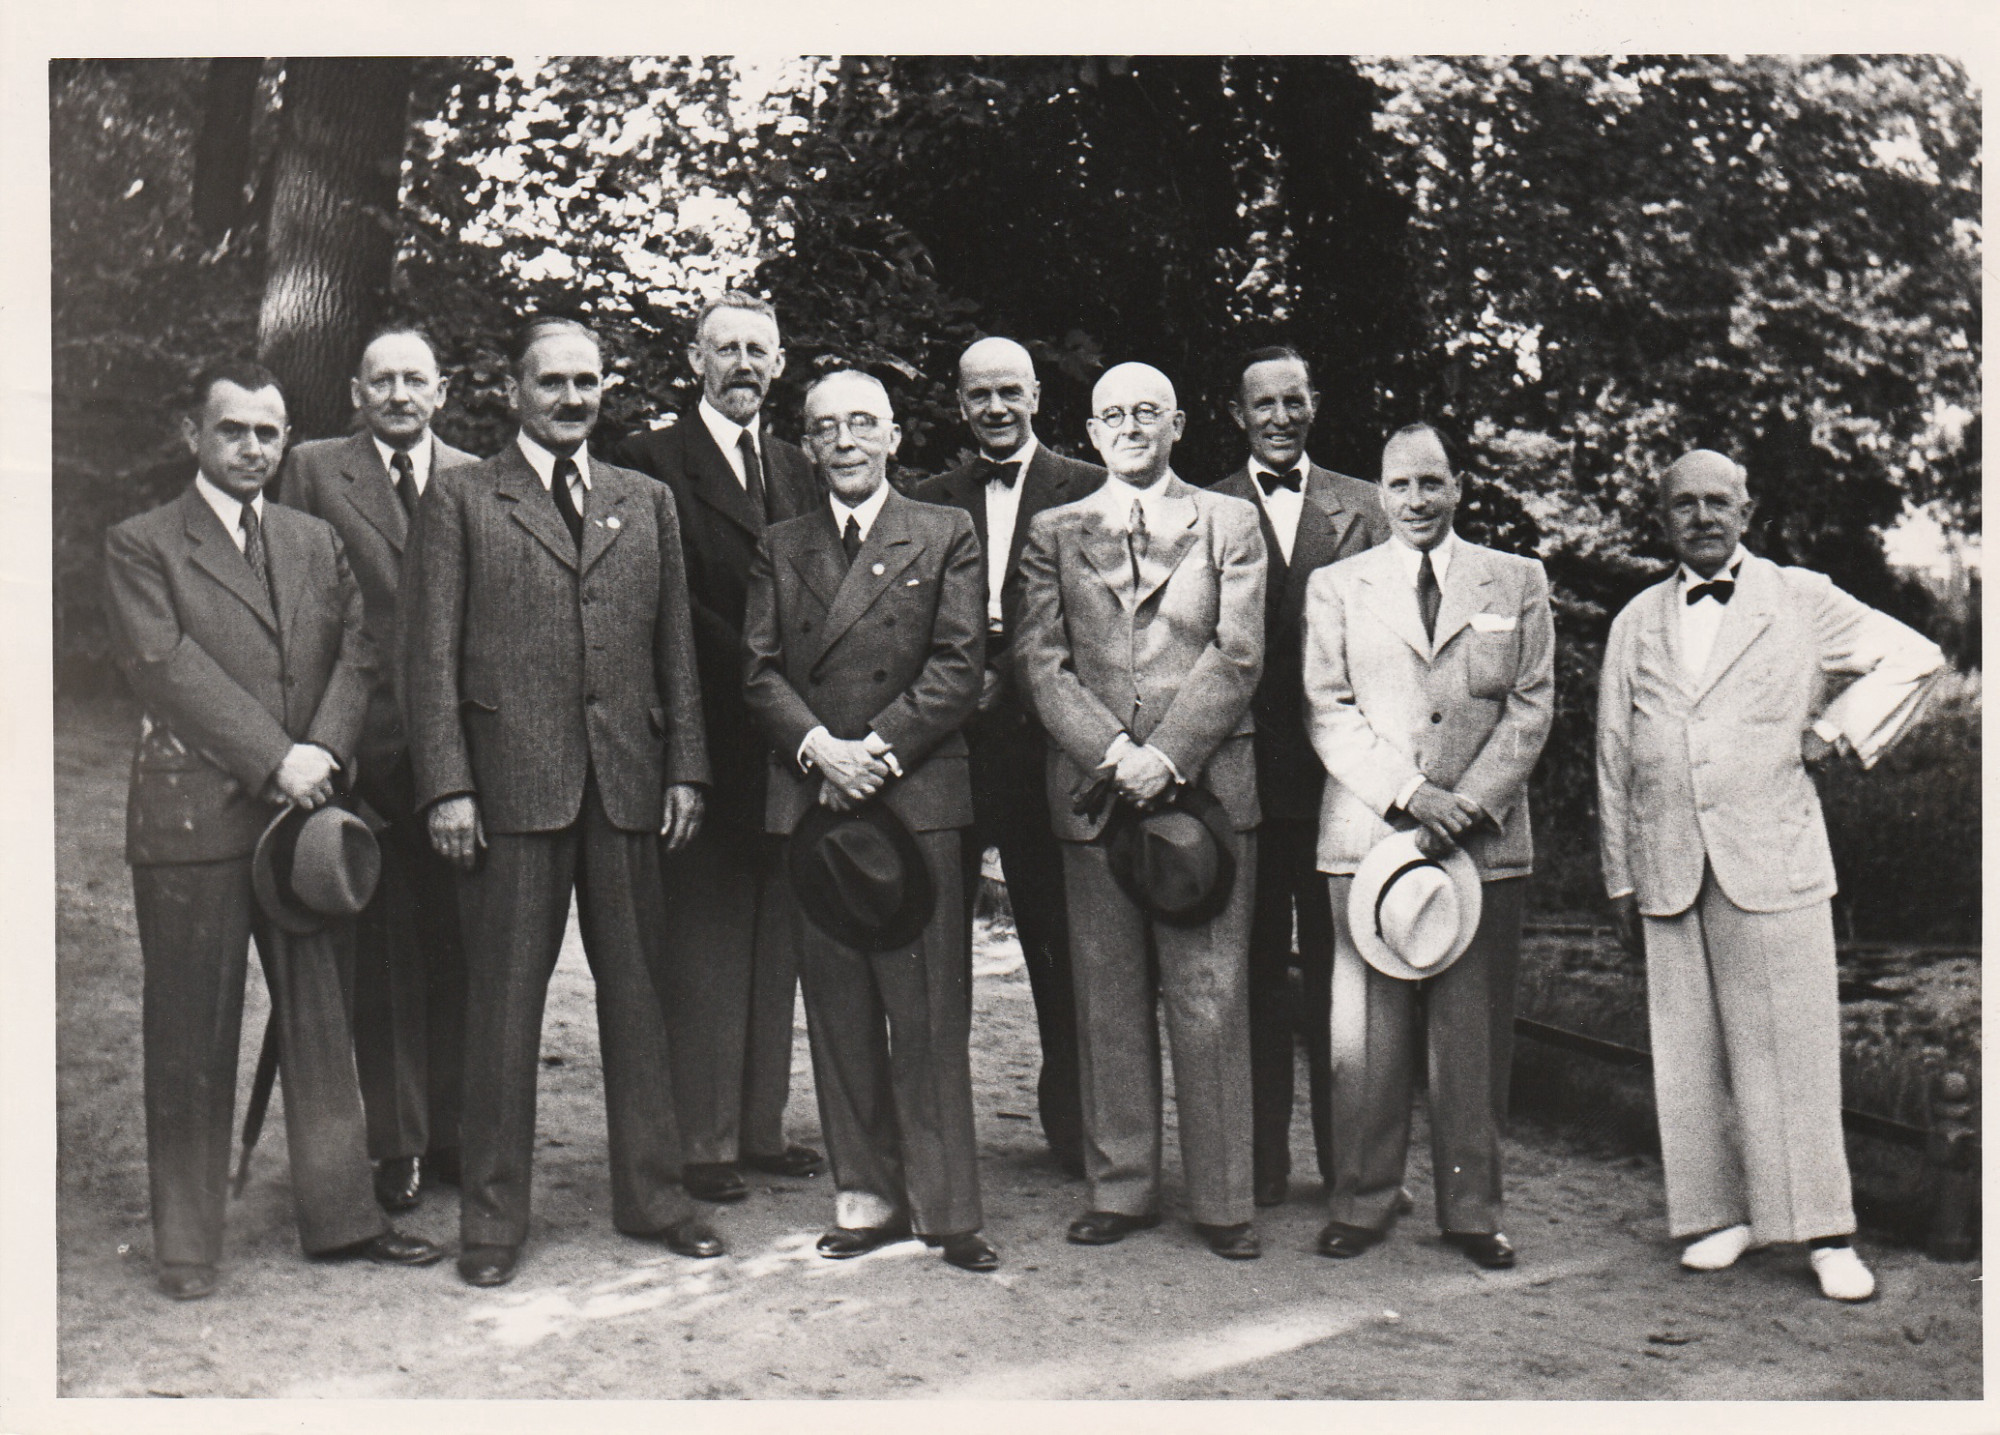 Black and white photograph: ten men in suits